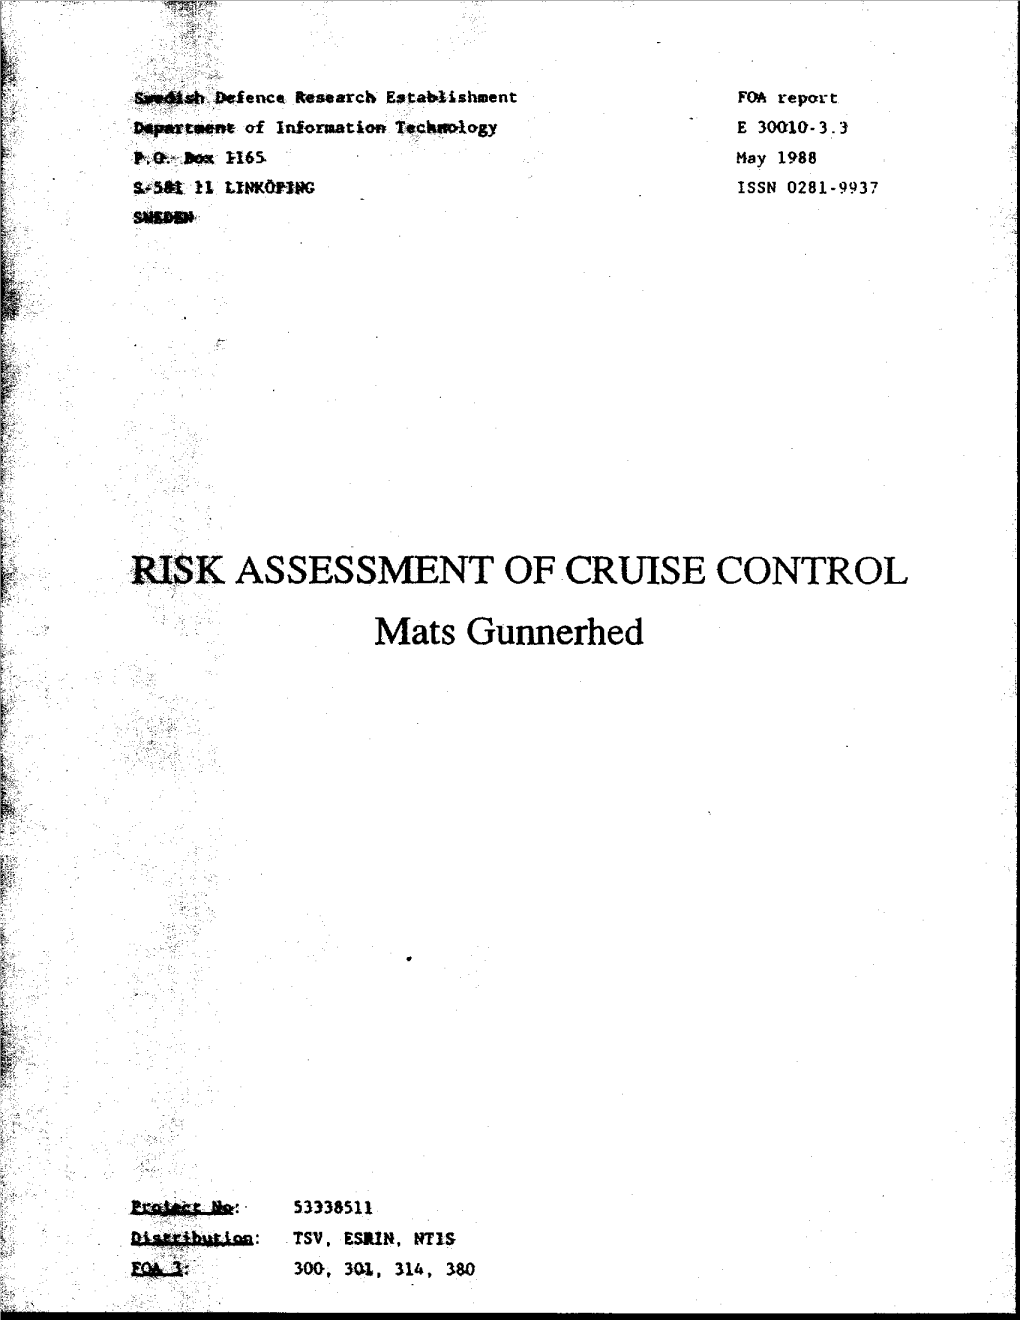 Risk Assessment of Cruise Control